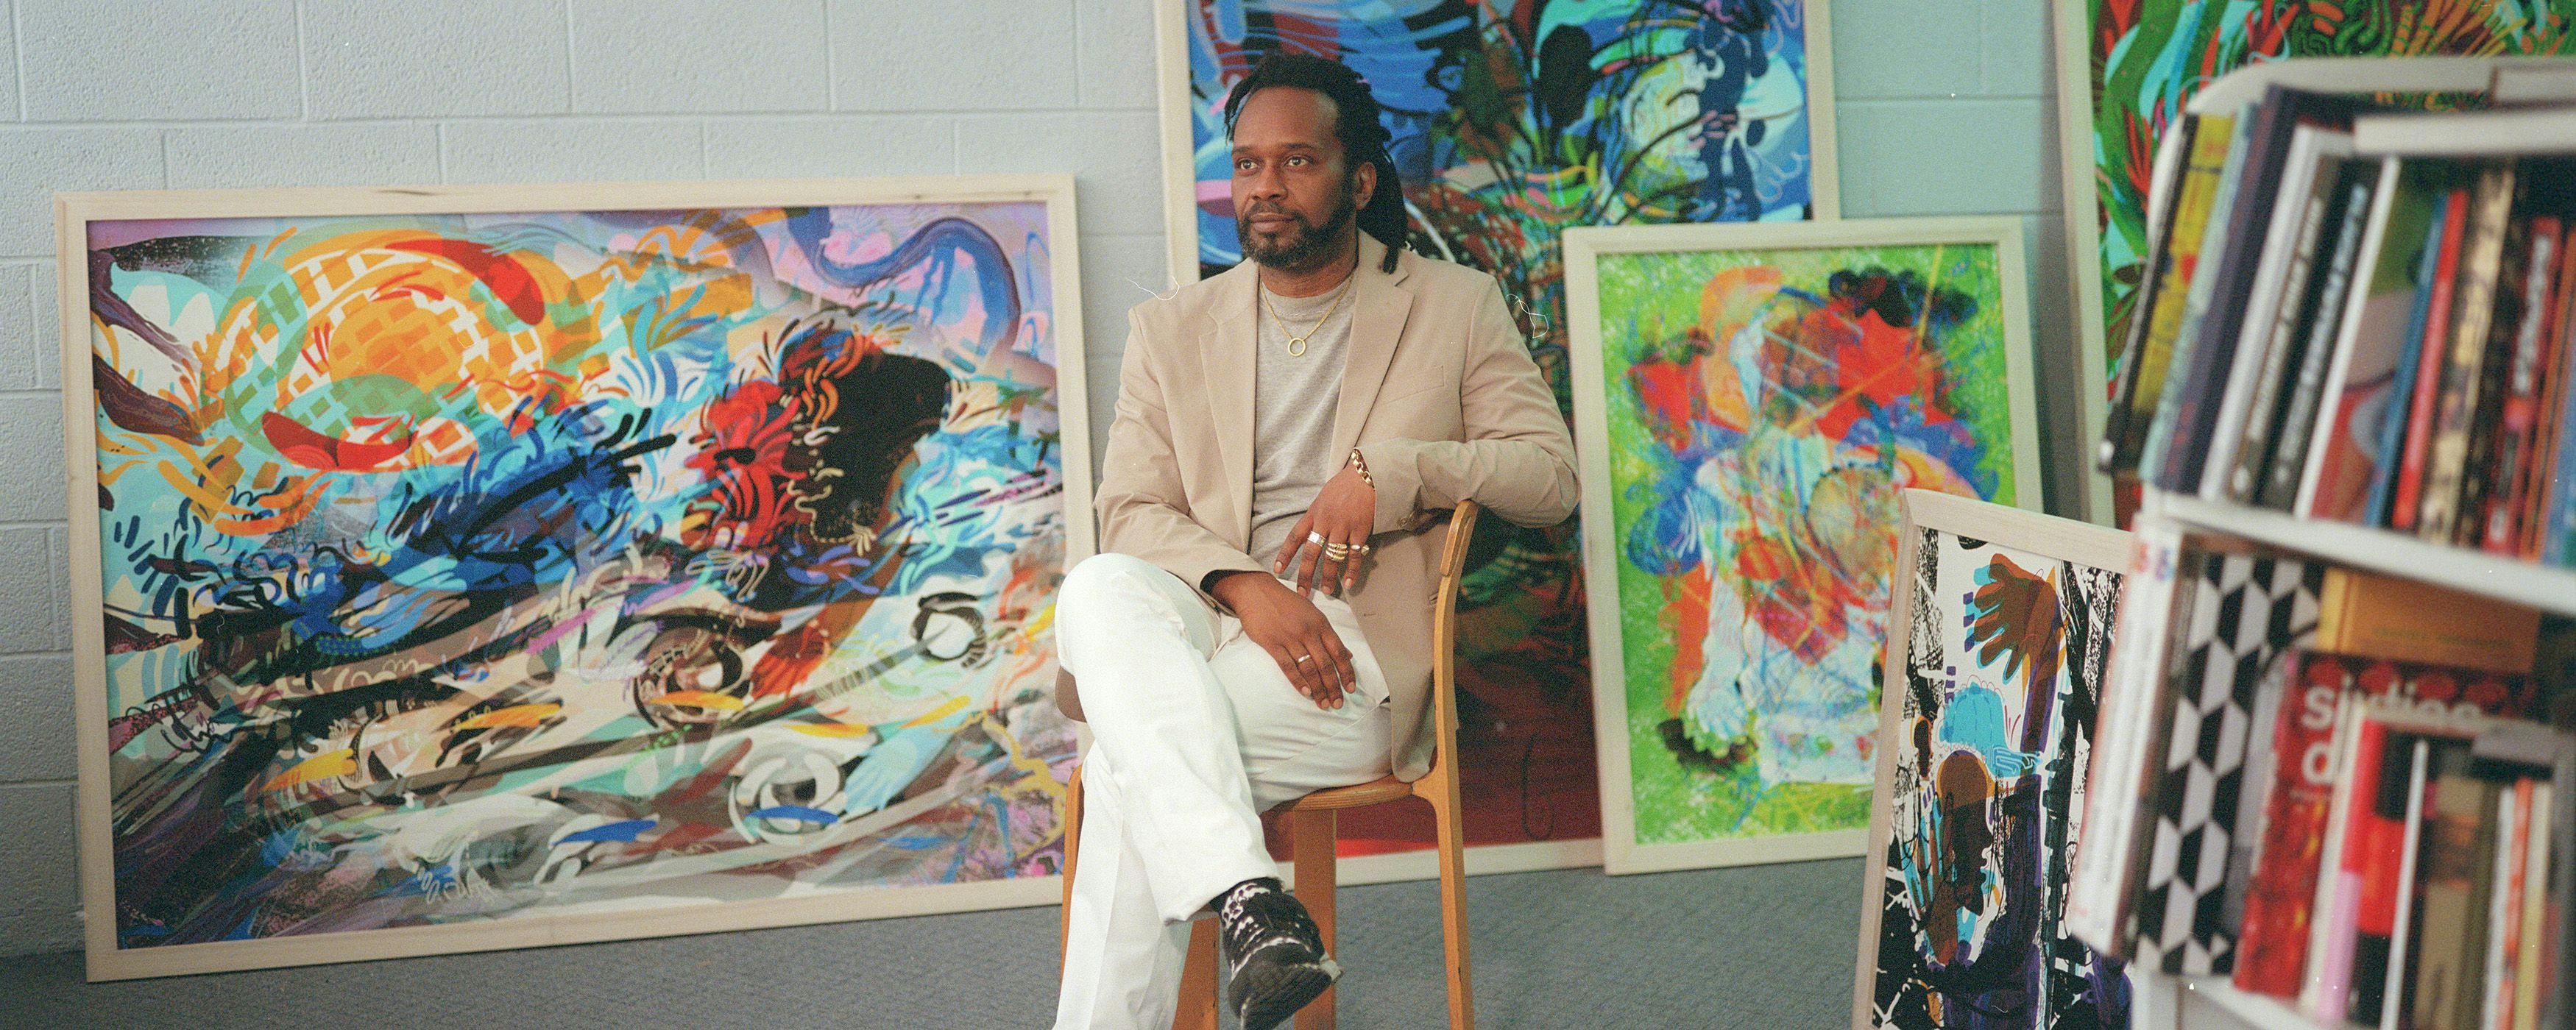 Moses Sun sits in a chair in his studio surrounded by paintings and books